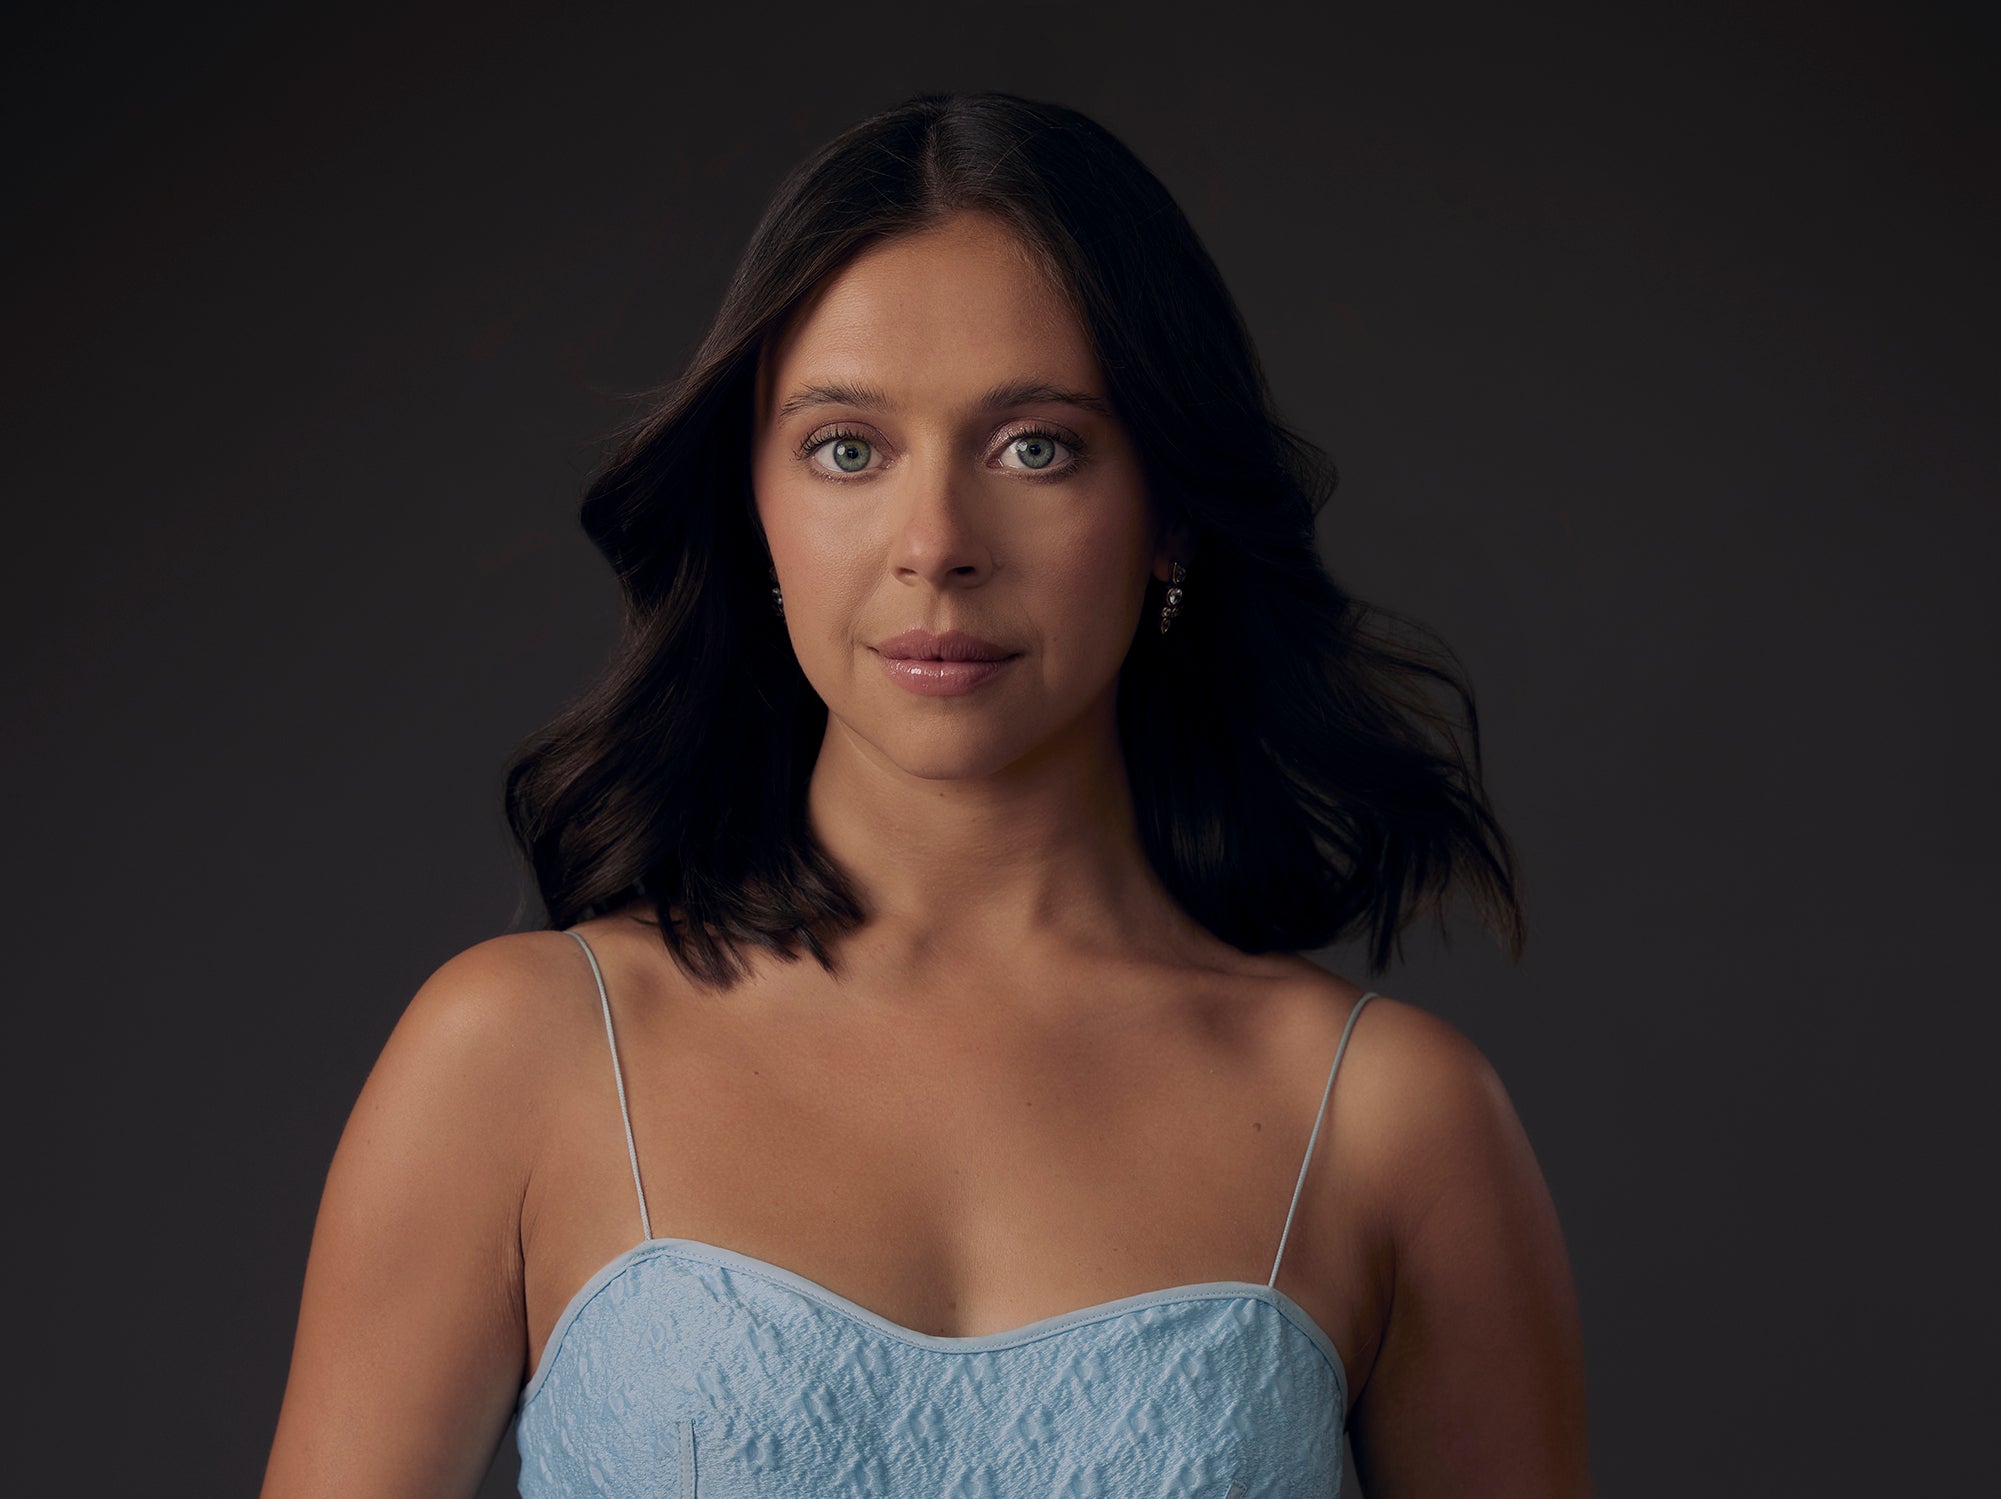 Bel Powley on Botox, nepotism and difficult sex scenes The heroin chic thing is gonna die again, right? The Independent photo photo